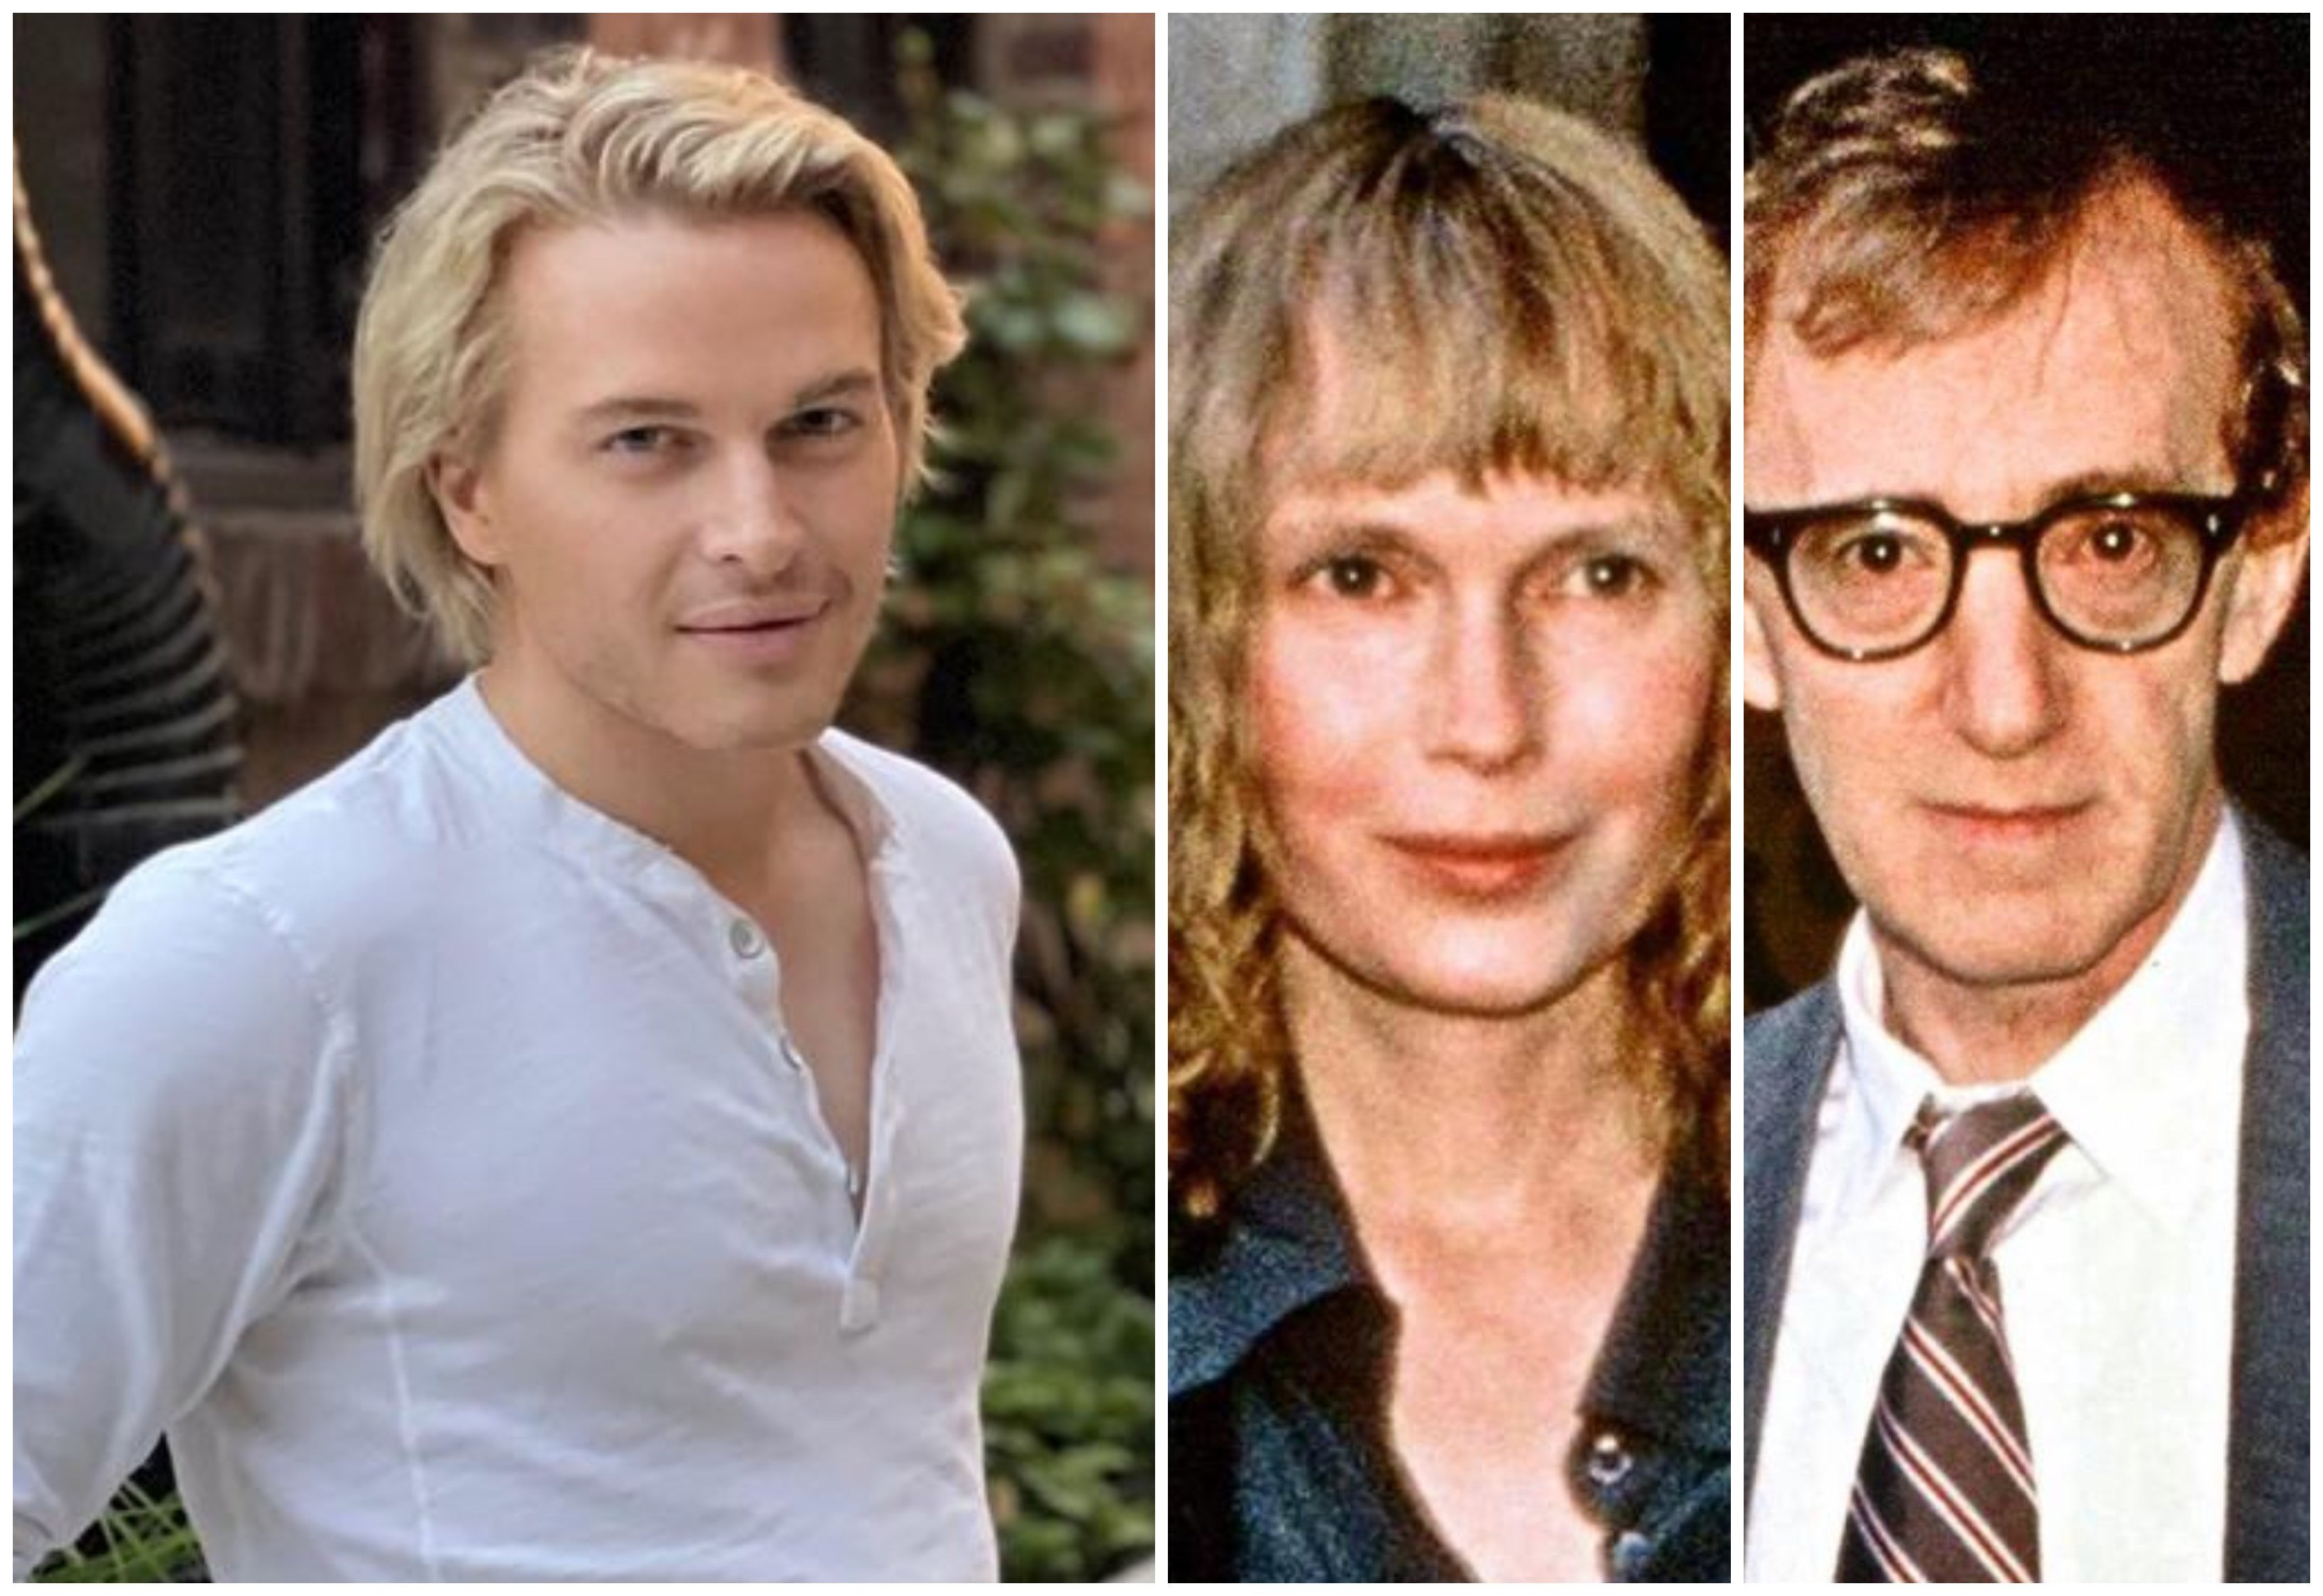 Ronan Farrow is the son of Mia Farrow and Woody Allen ... but what do we know about him besides his famous parentage? Photos: @ronanfarrow/Instagram, @Qblurts/Twitter